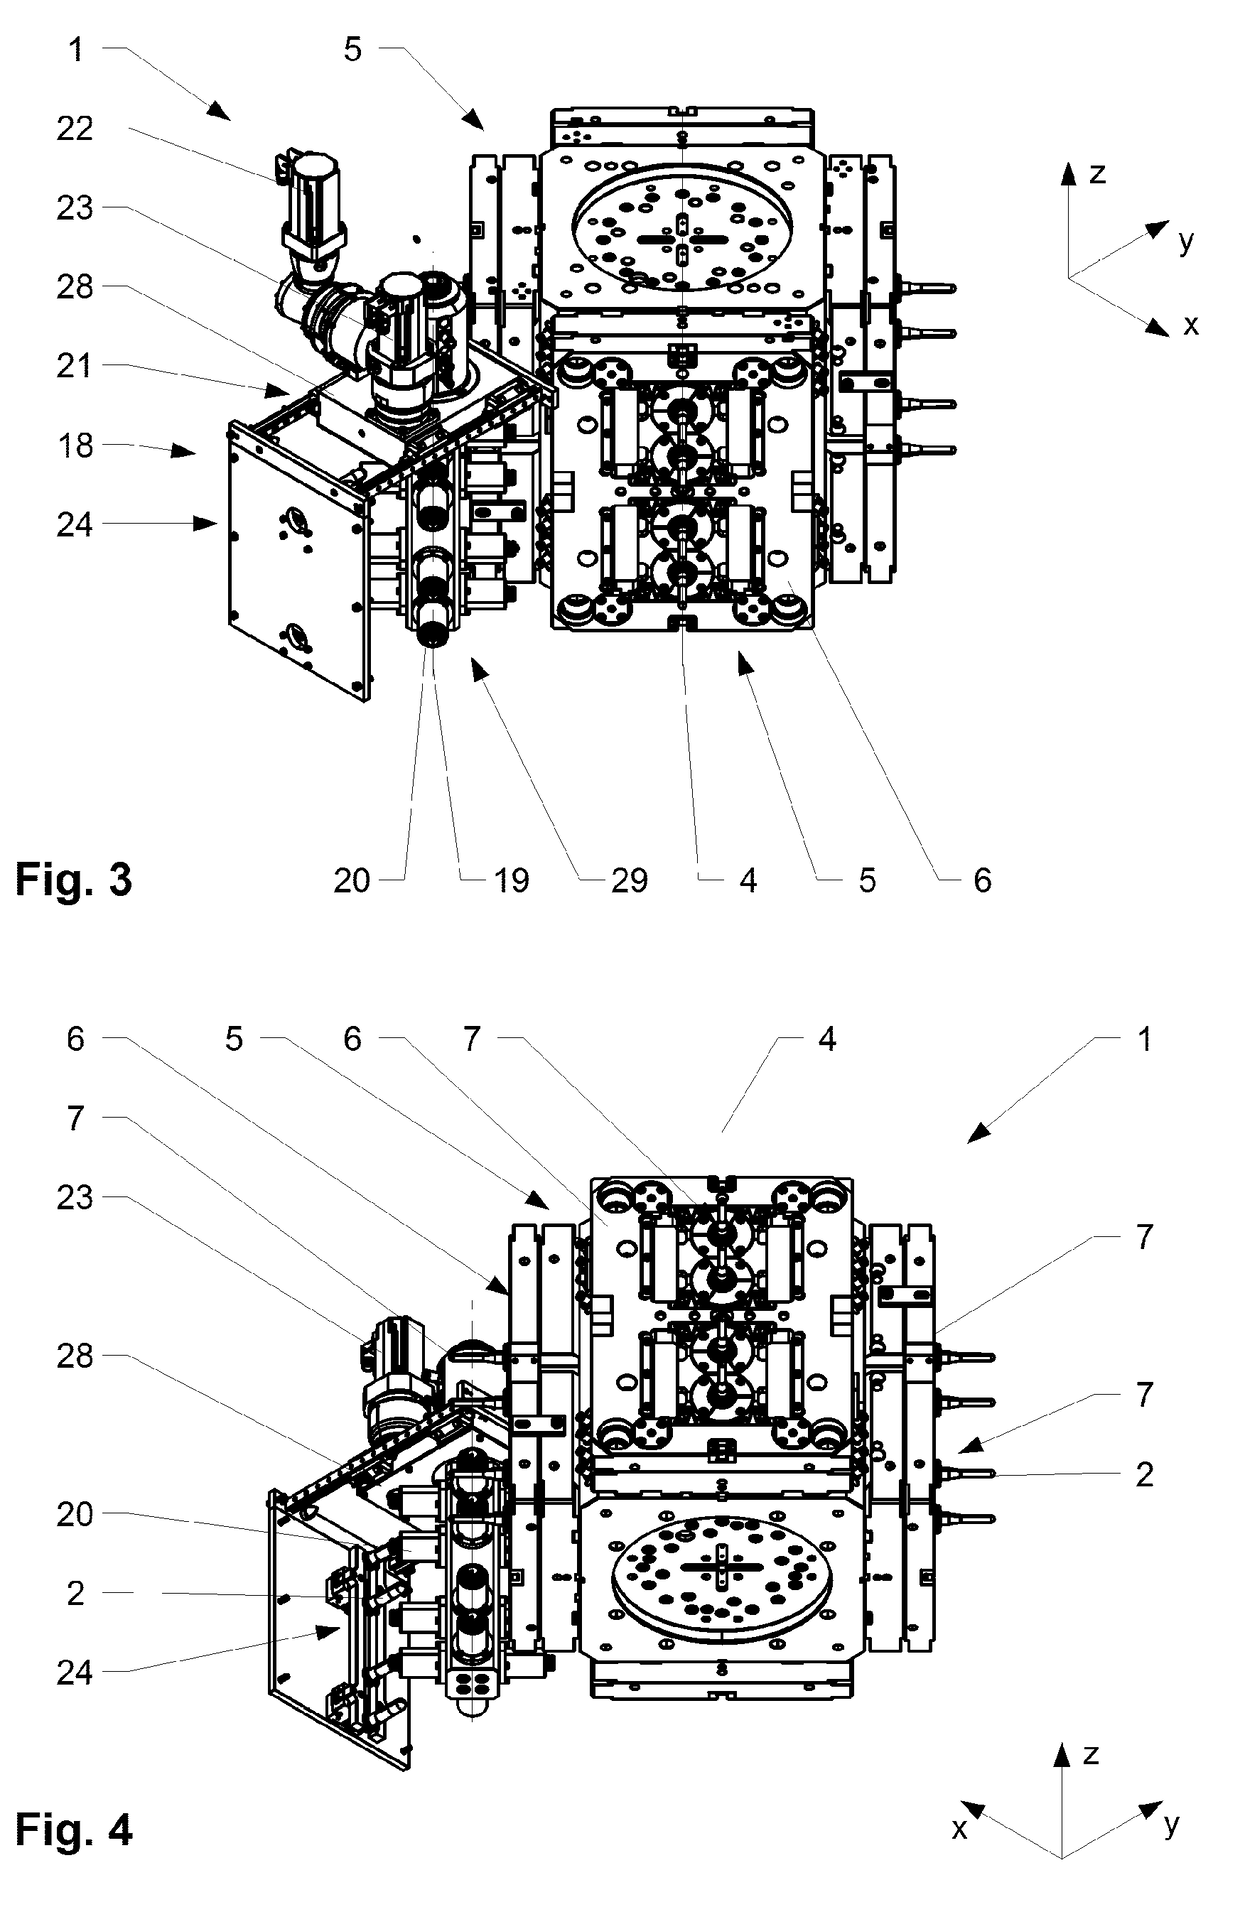 Injection moulding device for producing parts made of plastic